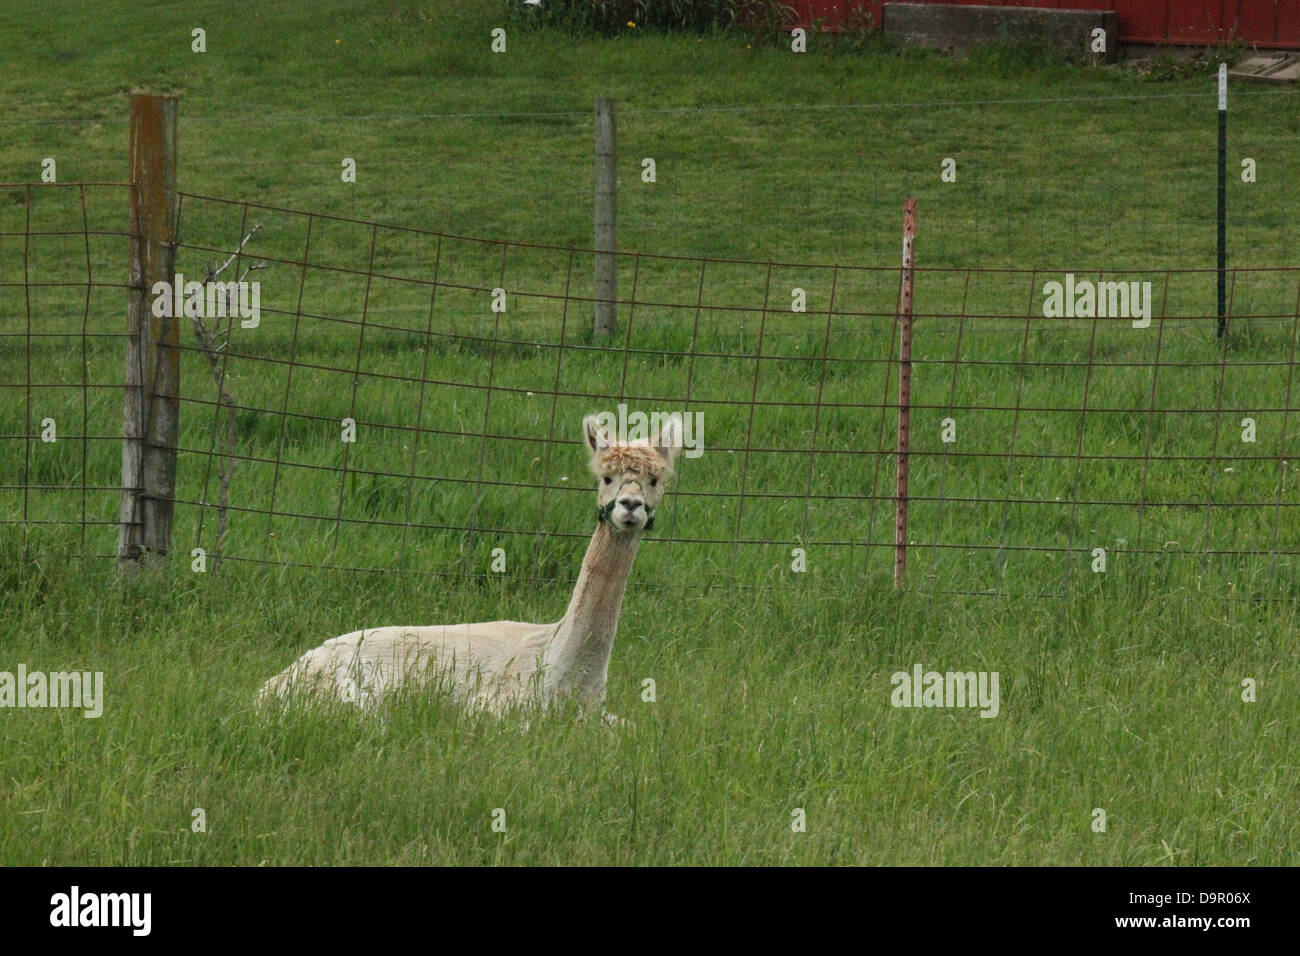 A picture of a llama in a field Stock Photo